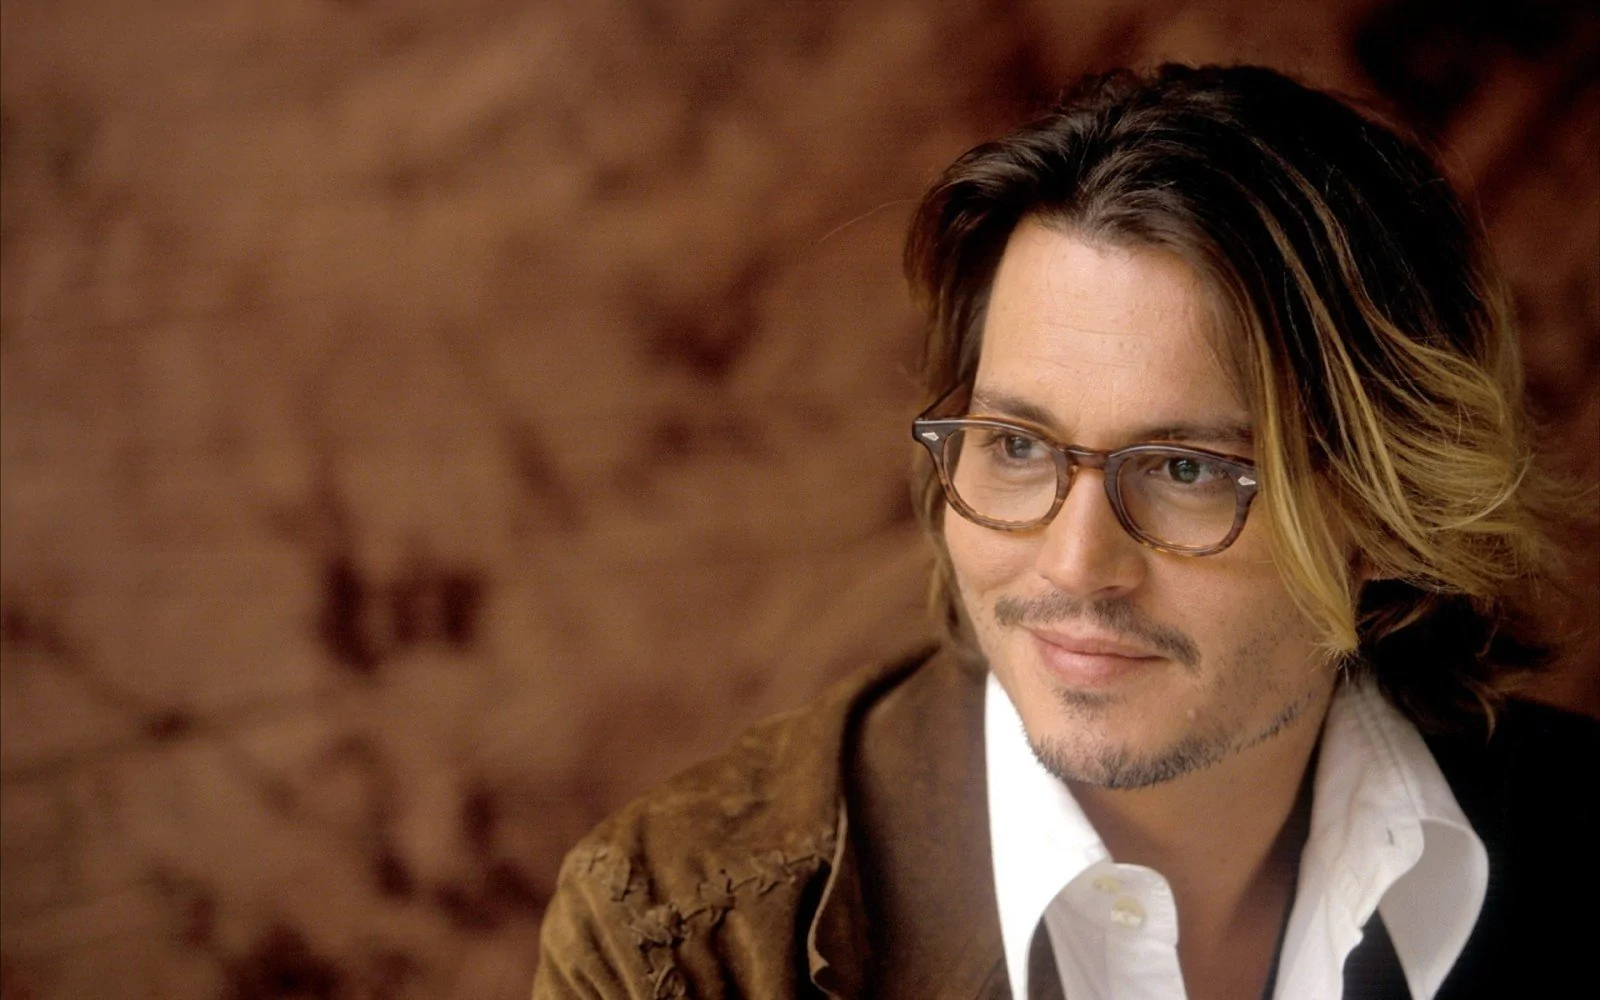 Johnny Depp Hair 6 Most Iconic Looks to Copy  Cool Mens Hair